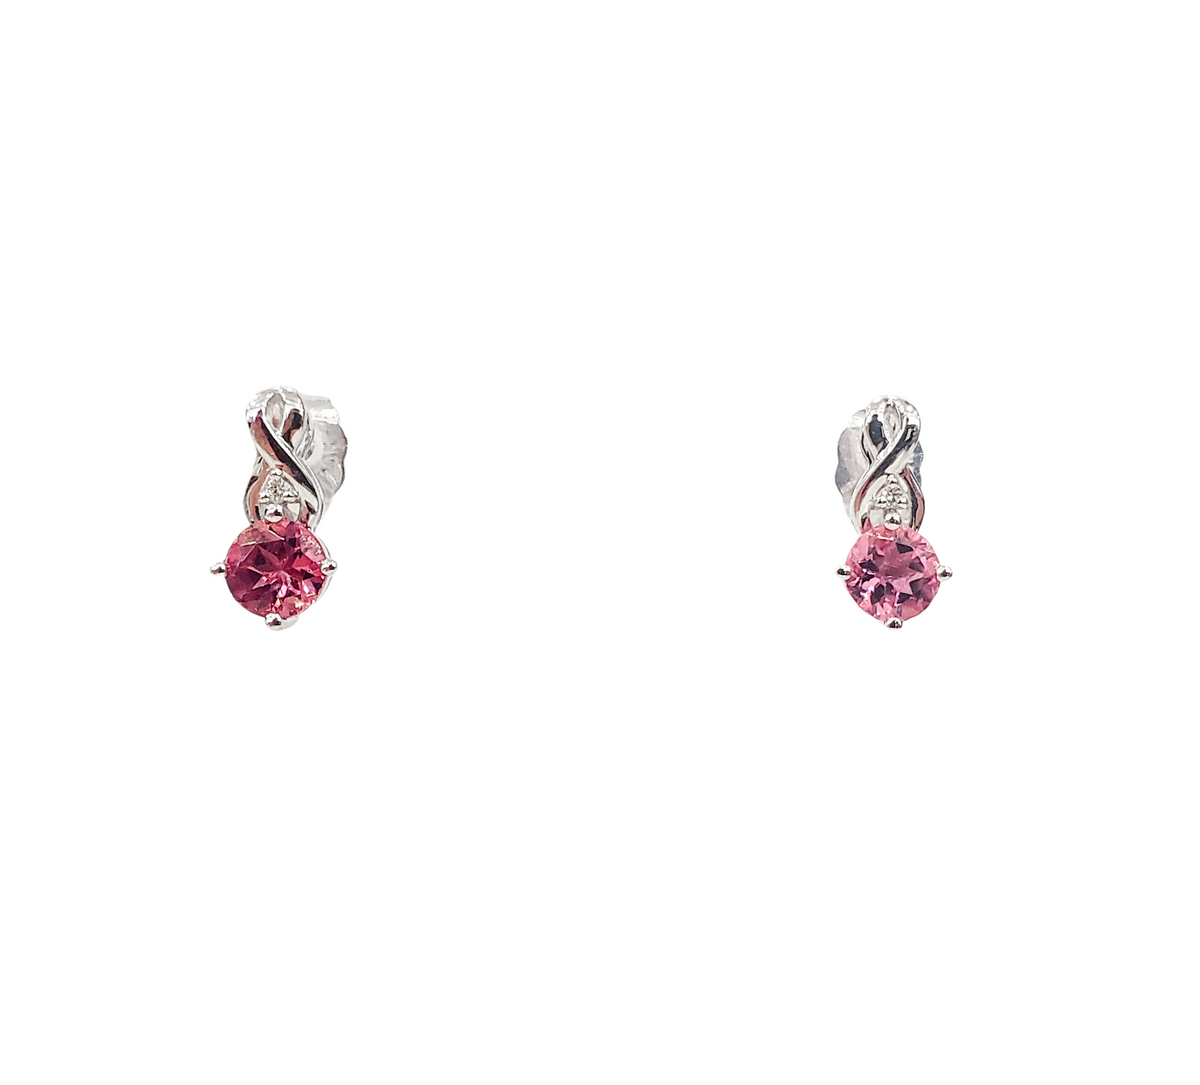 10K White Gold 0.90cttw Pink Tourmaline and 0.012cttw Diamond Stud Earrings with Butterfly Backings